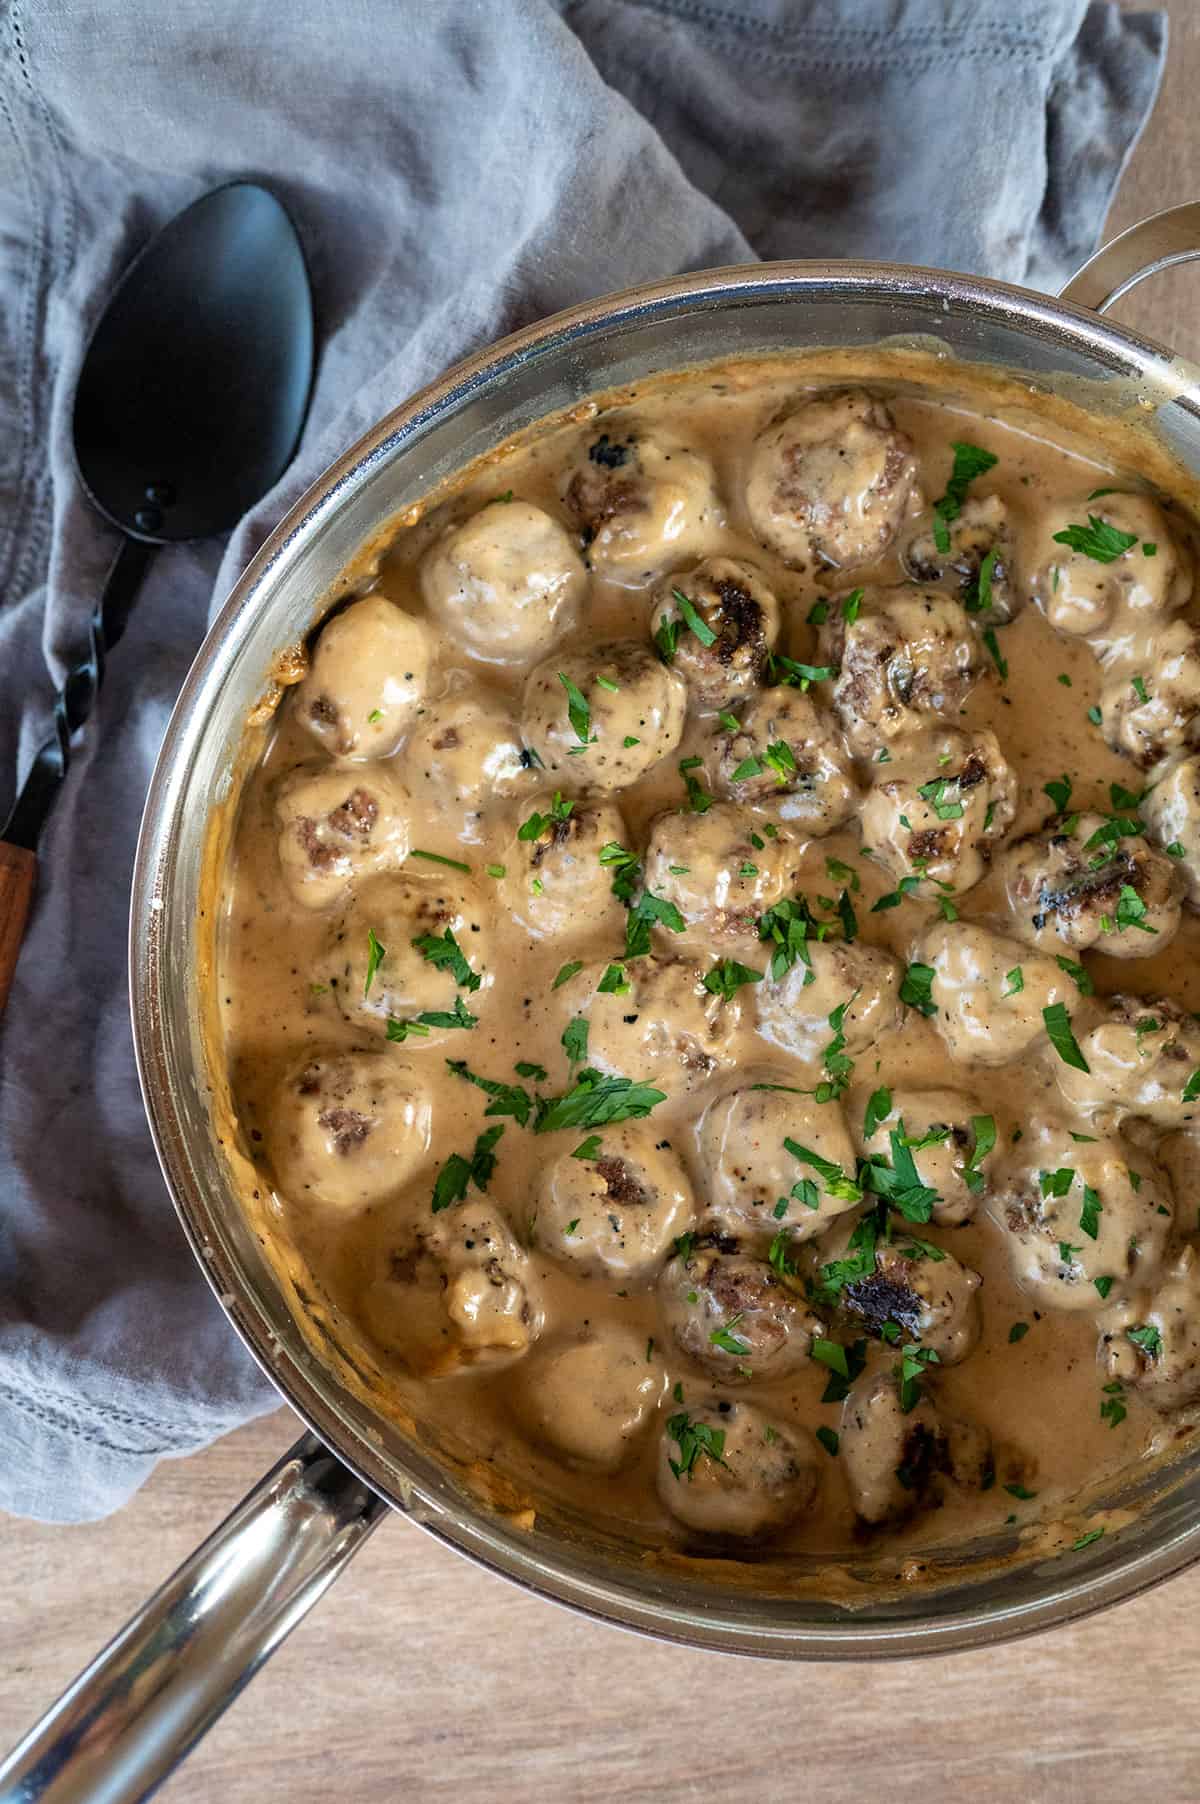 Swedish meatballs in sauce in skillet with parsley garnish.